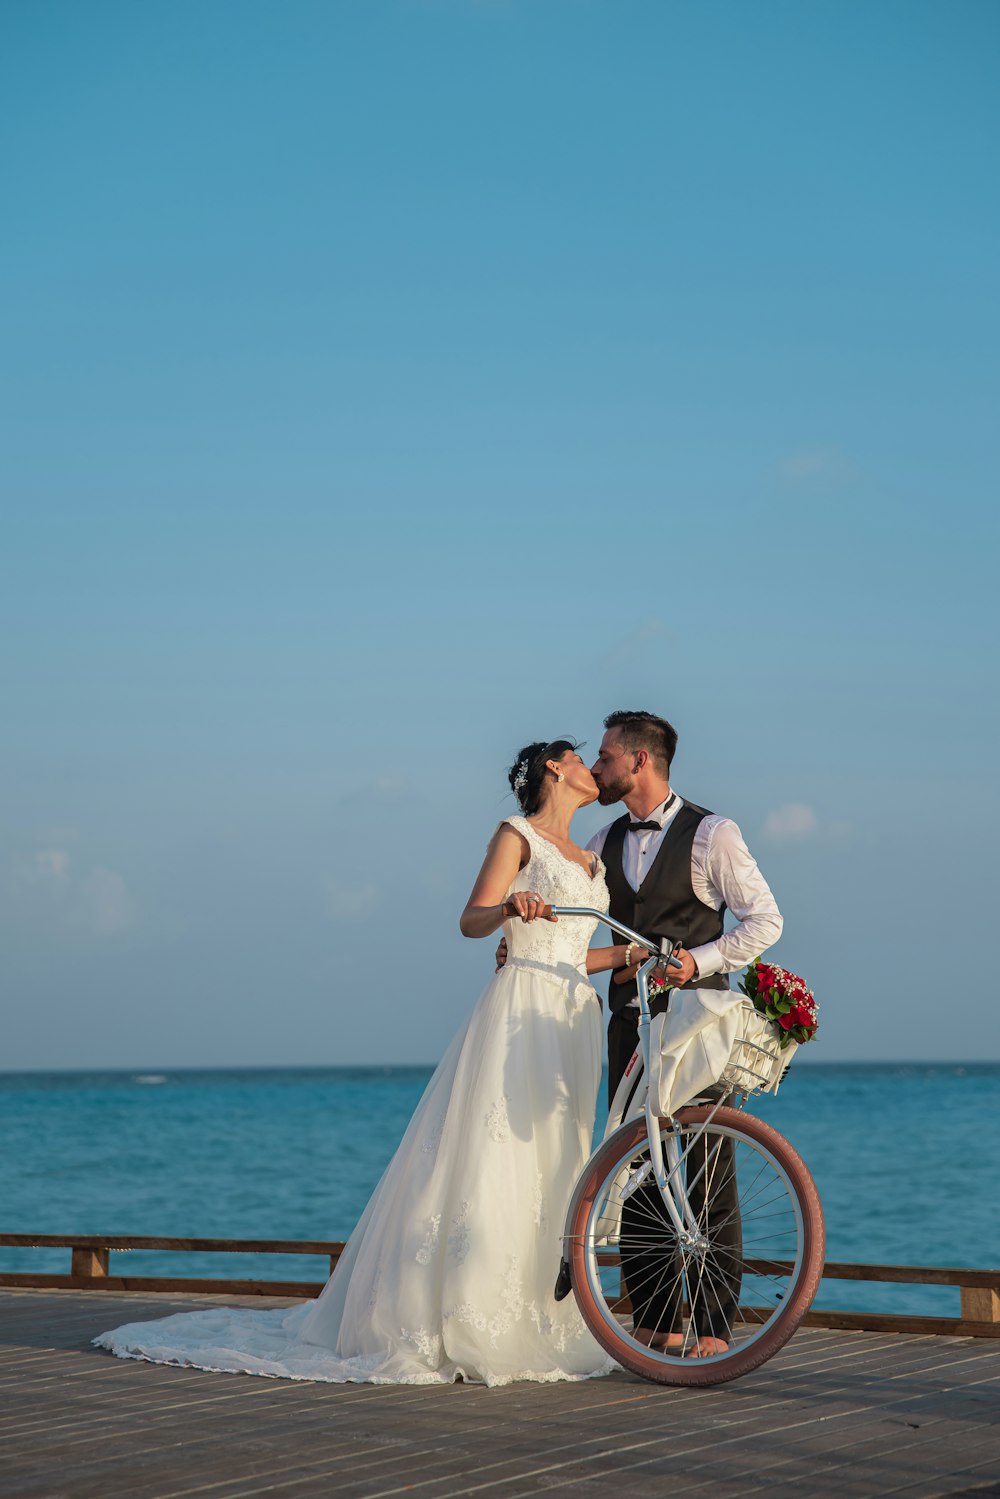 man and woman kissing on bicycle near sea during daytime